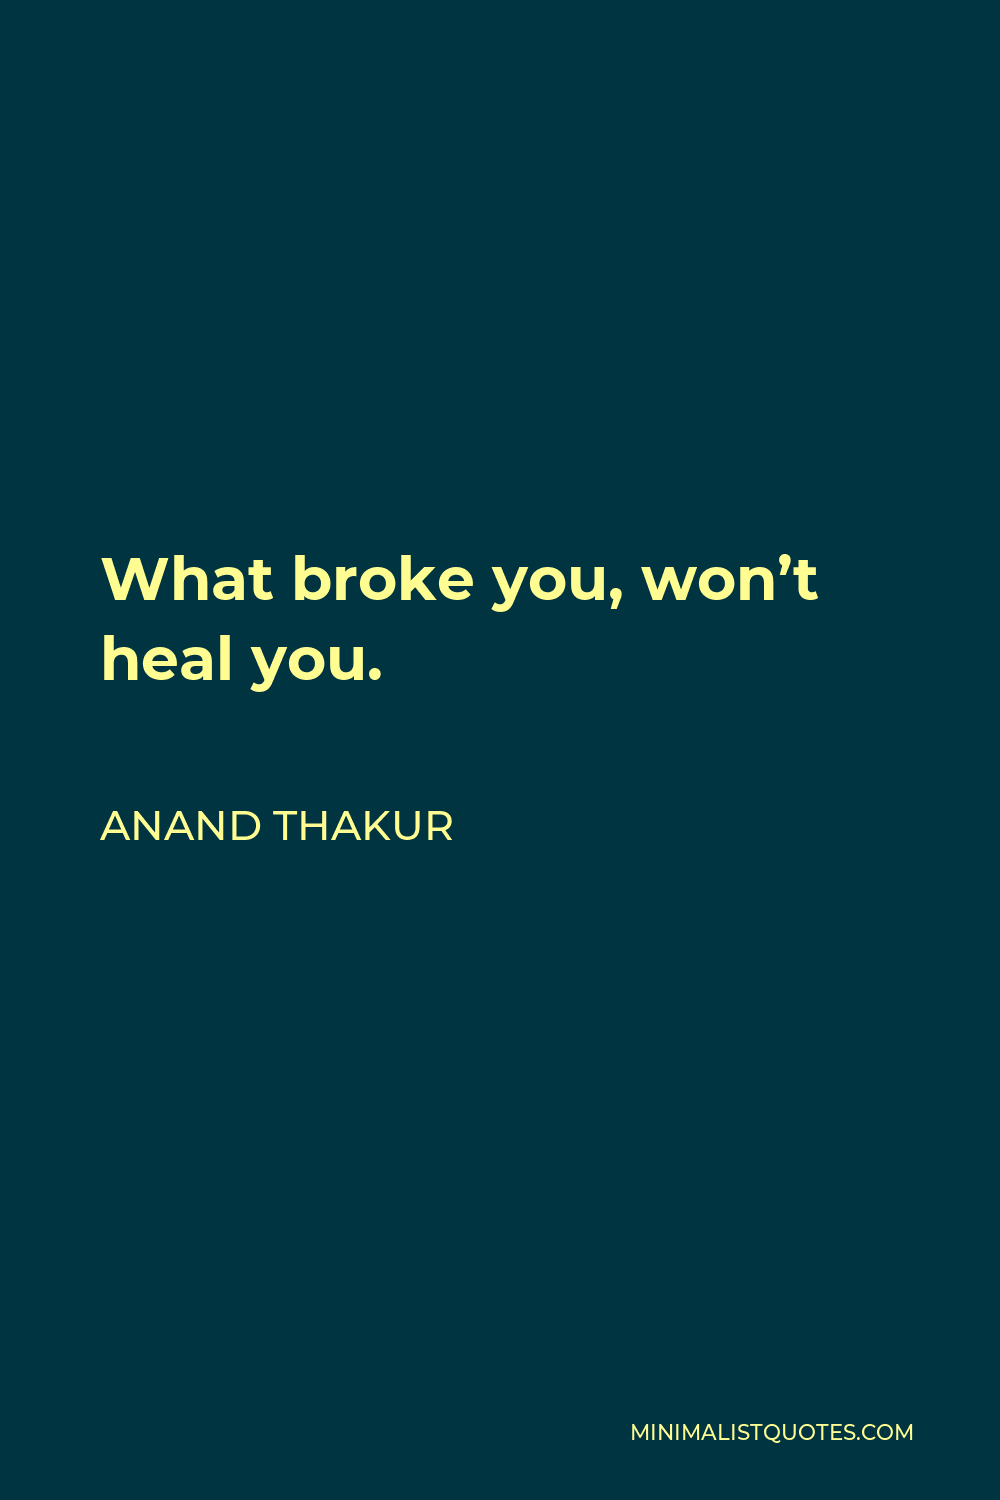 Anand Thakur Quote: What broke you, won't heal you.